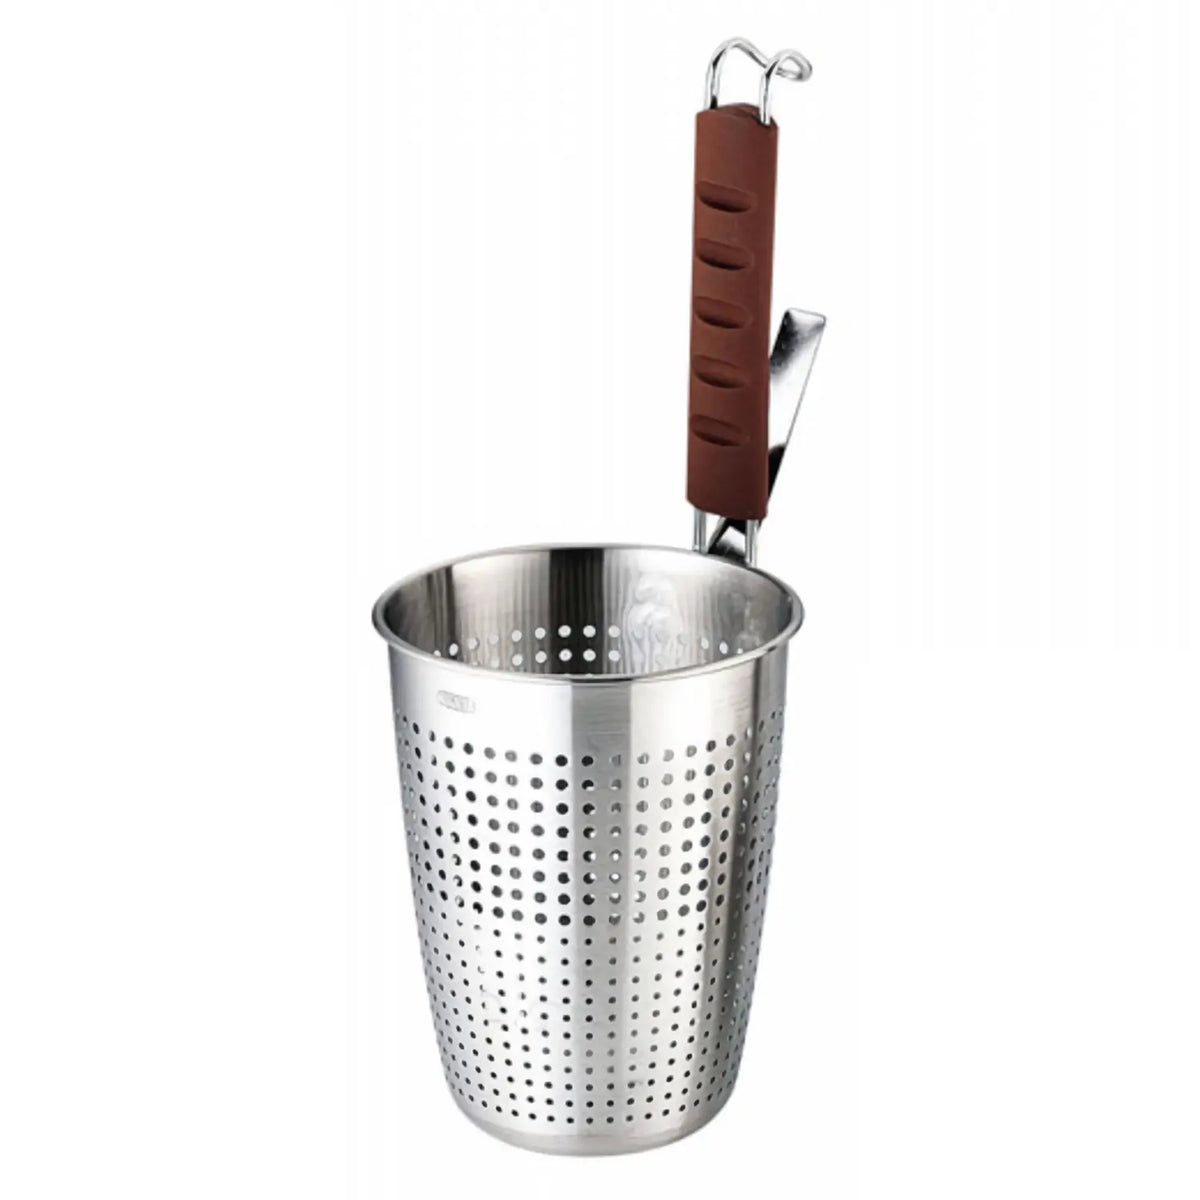 YUKIWA Stainless Steel Perforated Tebo Noodle Strainer with Silicone Handle